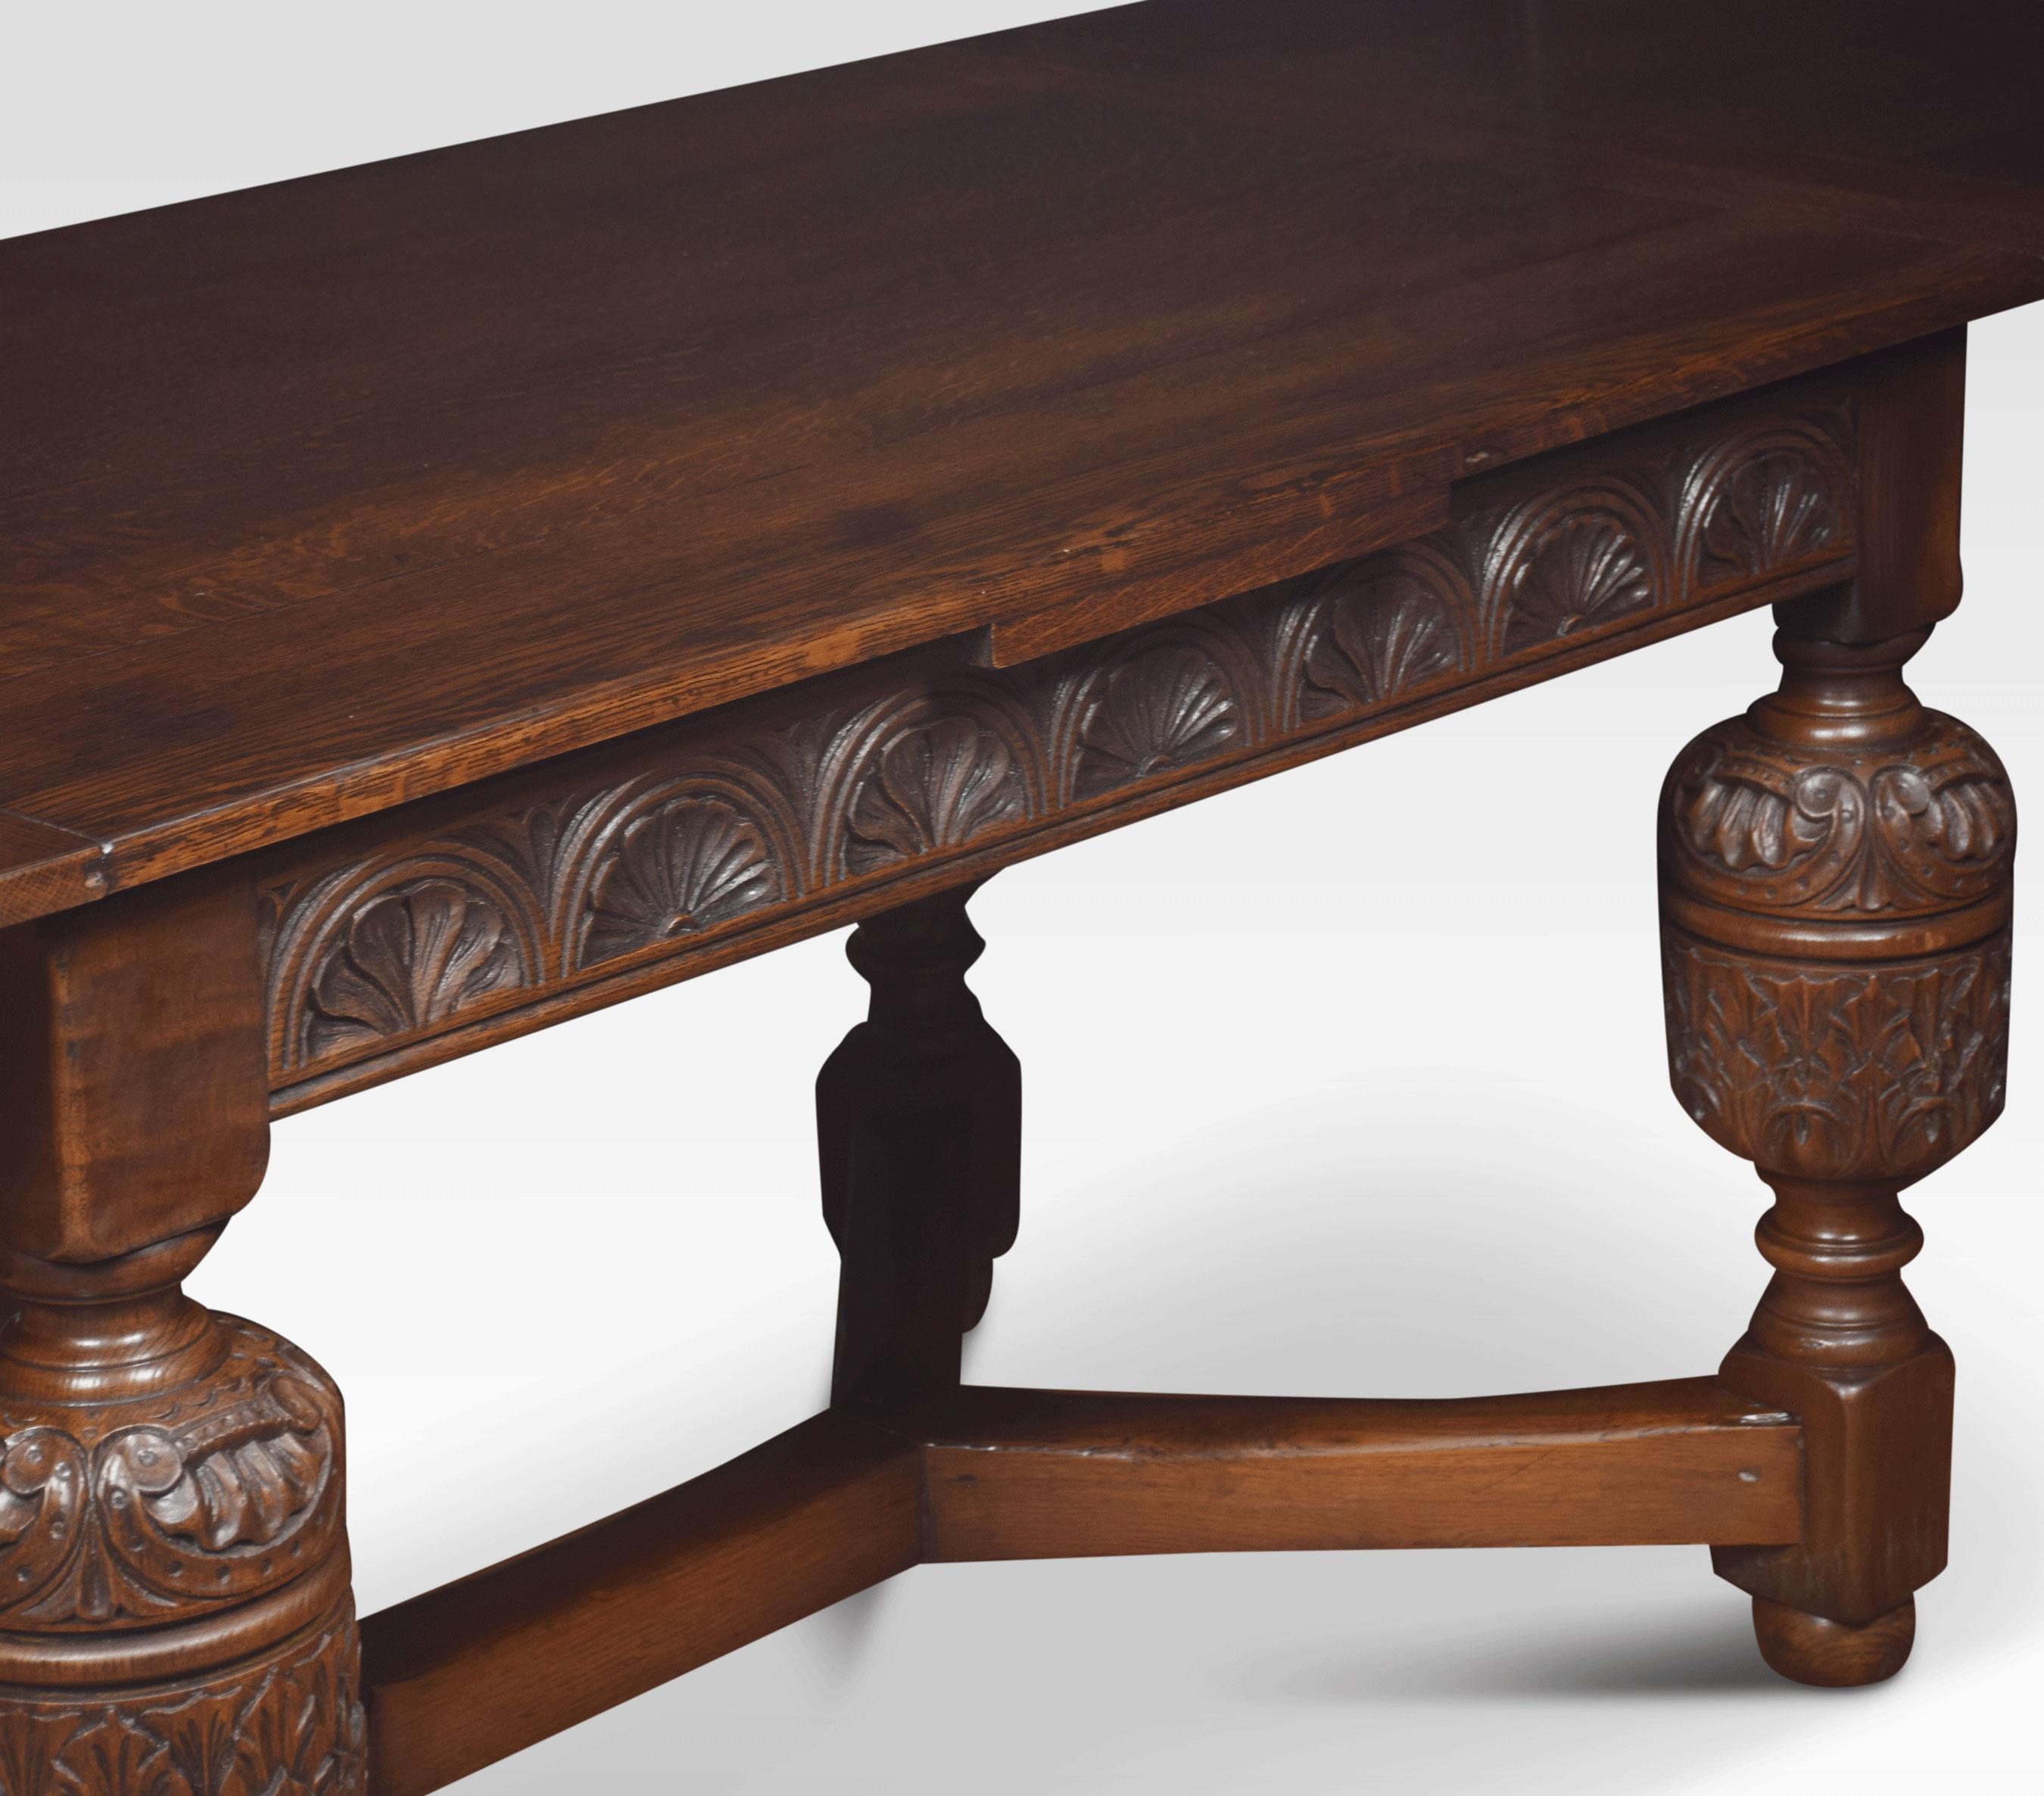 Oak draw-leaf table the plank top having pull-out leaves to each end above a carved frieze raised on bulbous cup and cover legs leading down to bun feet united by stretchers.
Dimensions:
Height 31 inches
Width 54 inches when open 96 inches
Depth